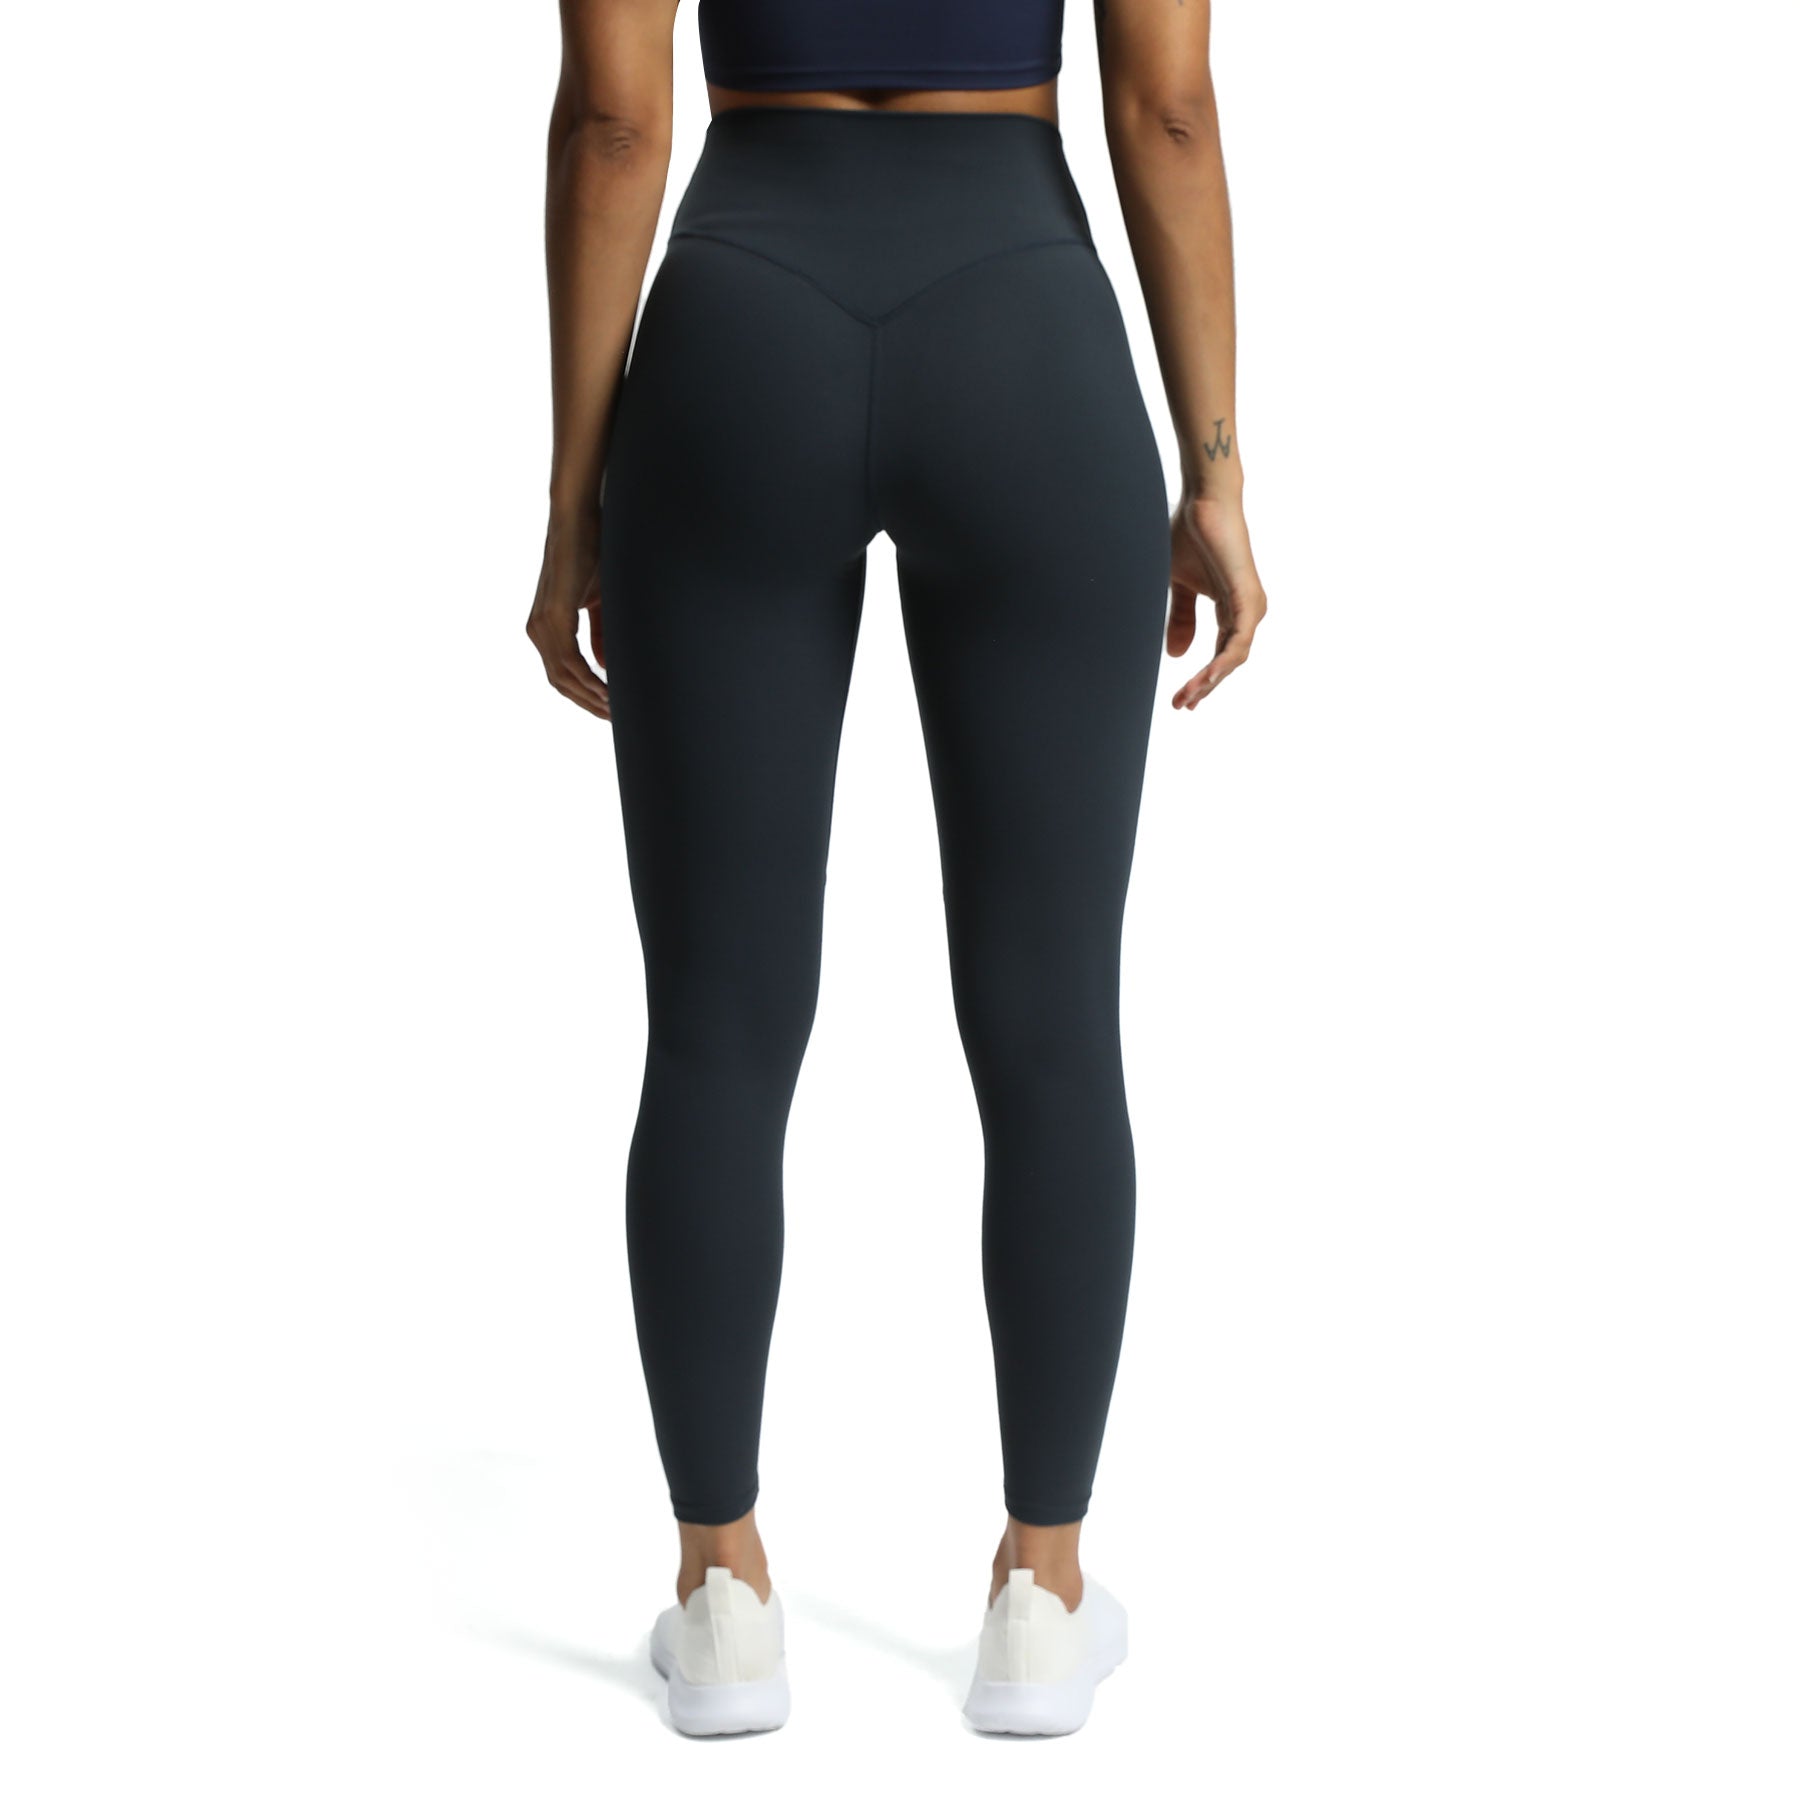 Aoxjox seamless leggings, Electric blue marl (S) and Aoxjox black hype